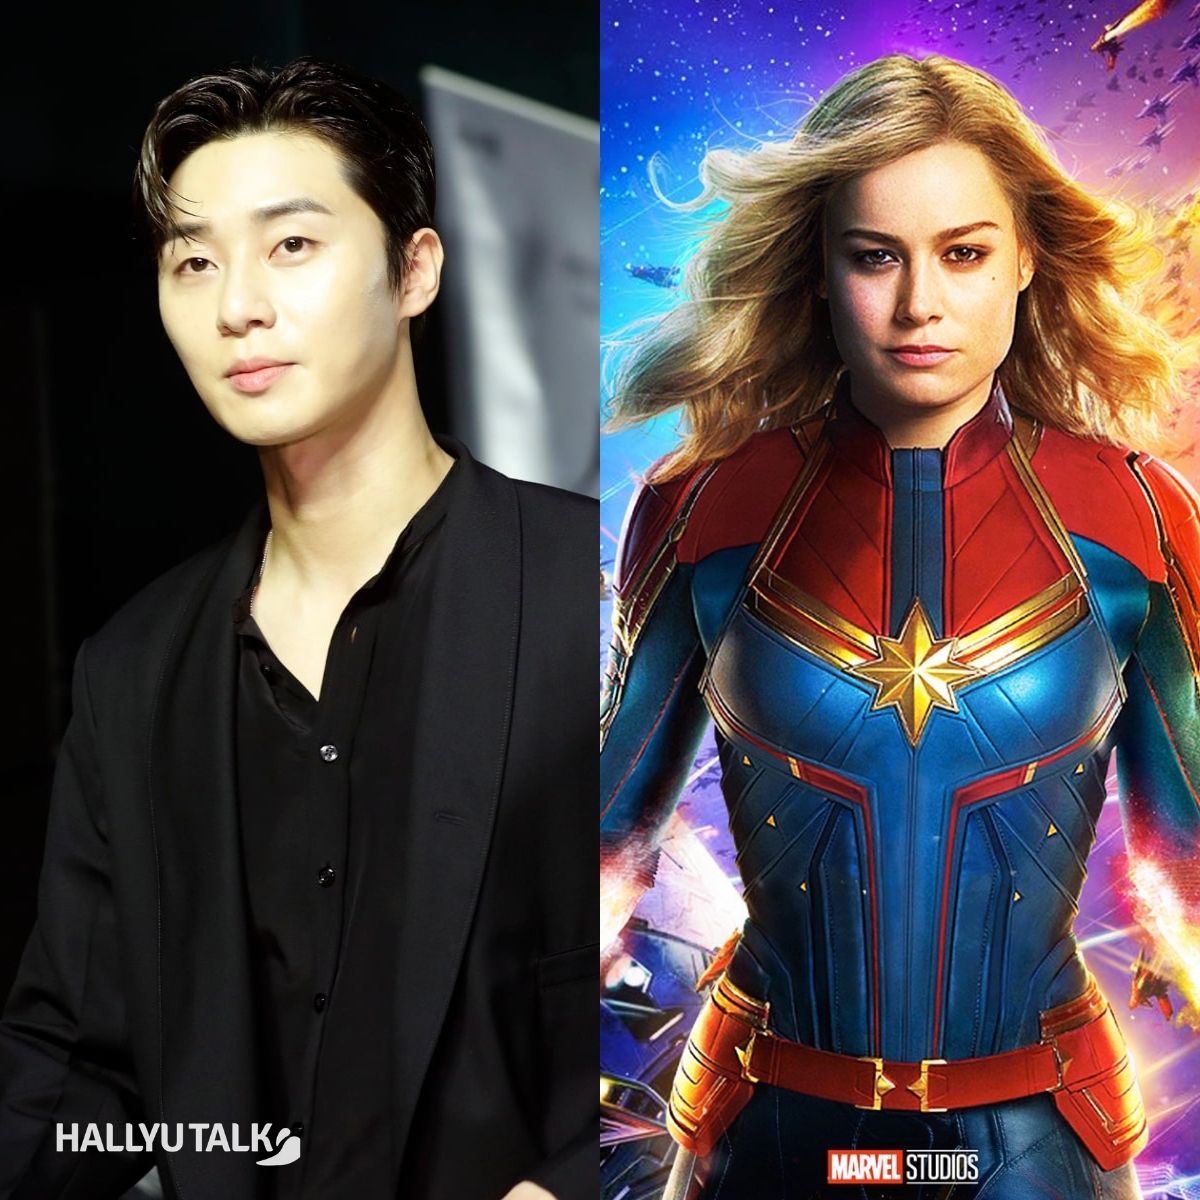 Park Seo Joon to star in MCU’s Captain Marvel 2 with Brie Larson? Agency responds